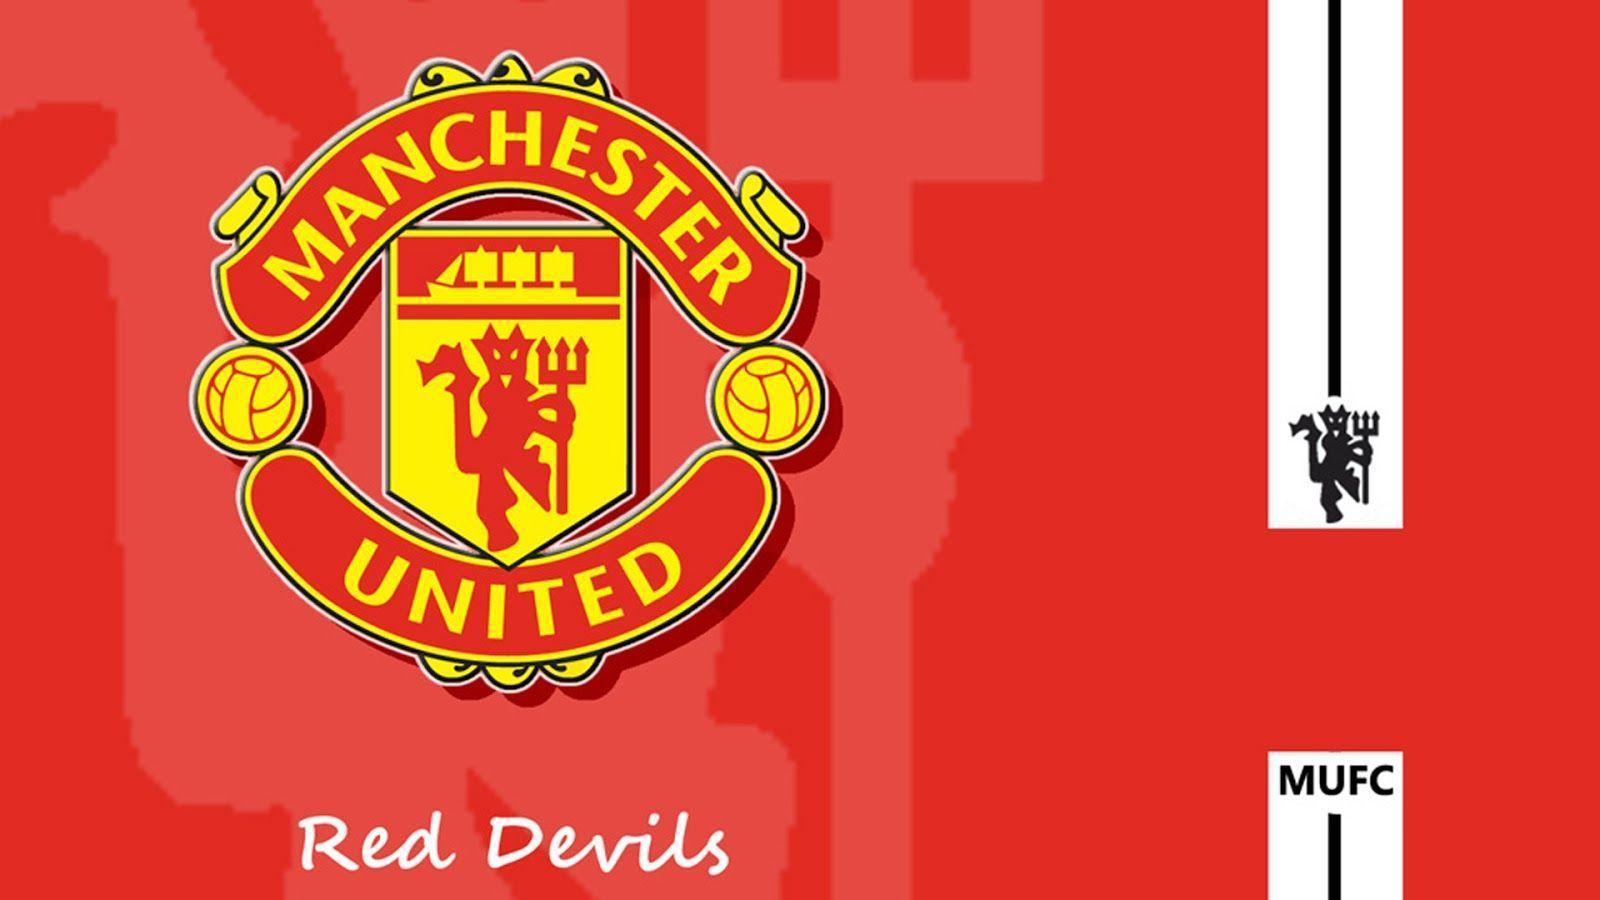 Image For > Manchester United Logo Wallpapers 2014